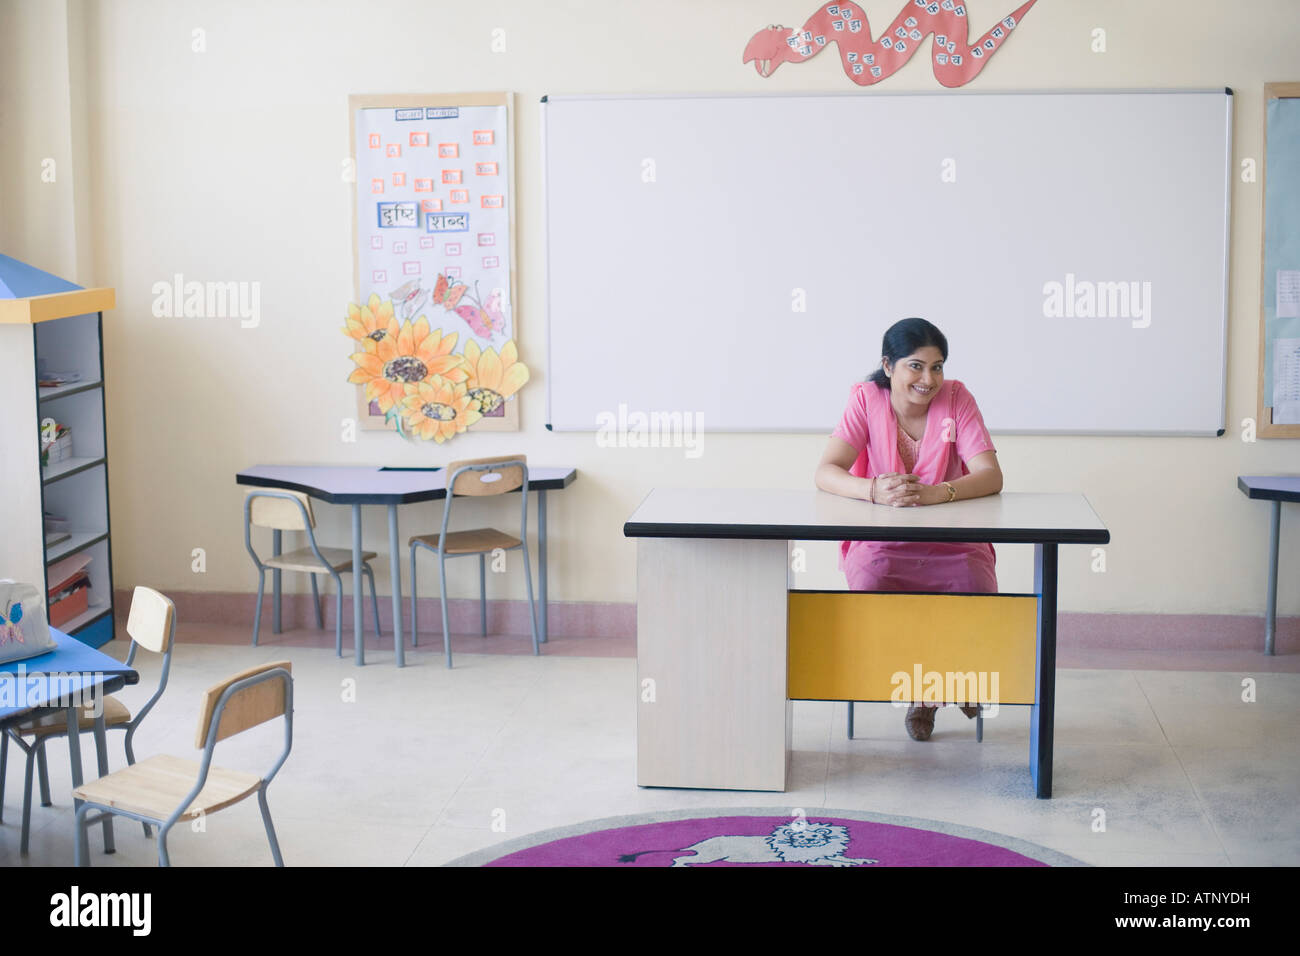 Portrait of a mid adult woman sitting at a desk and smiling in a classroom Stock Photo